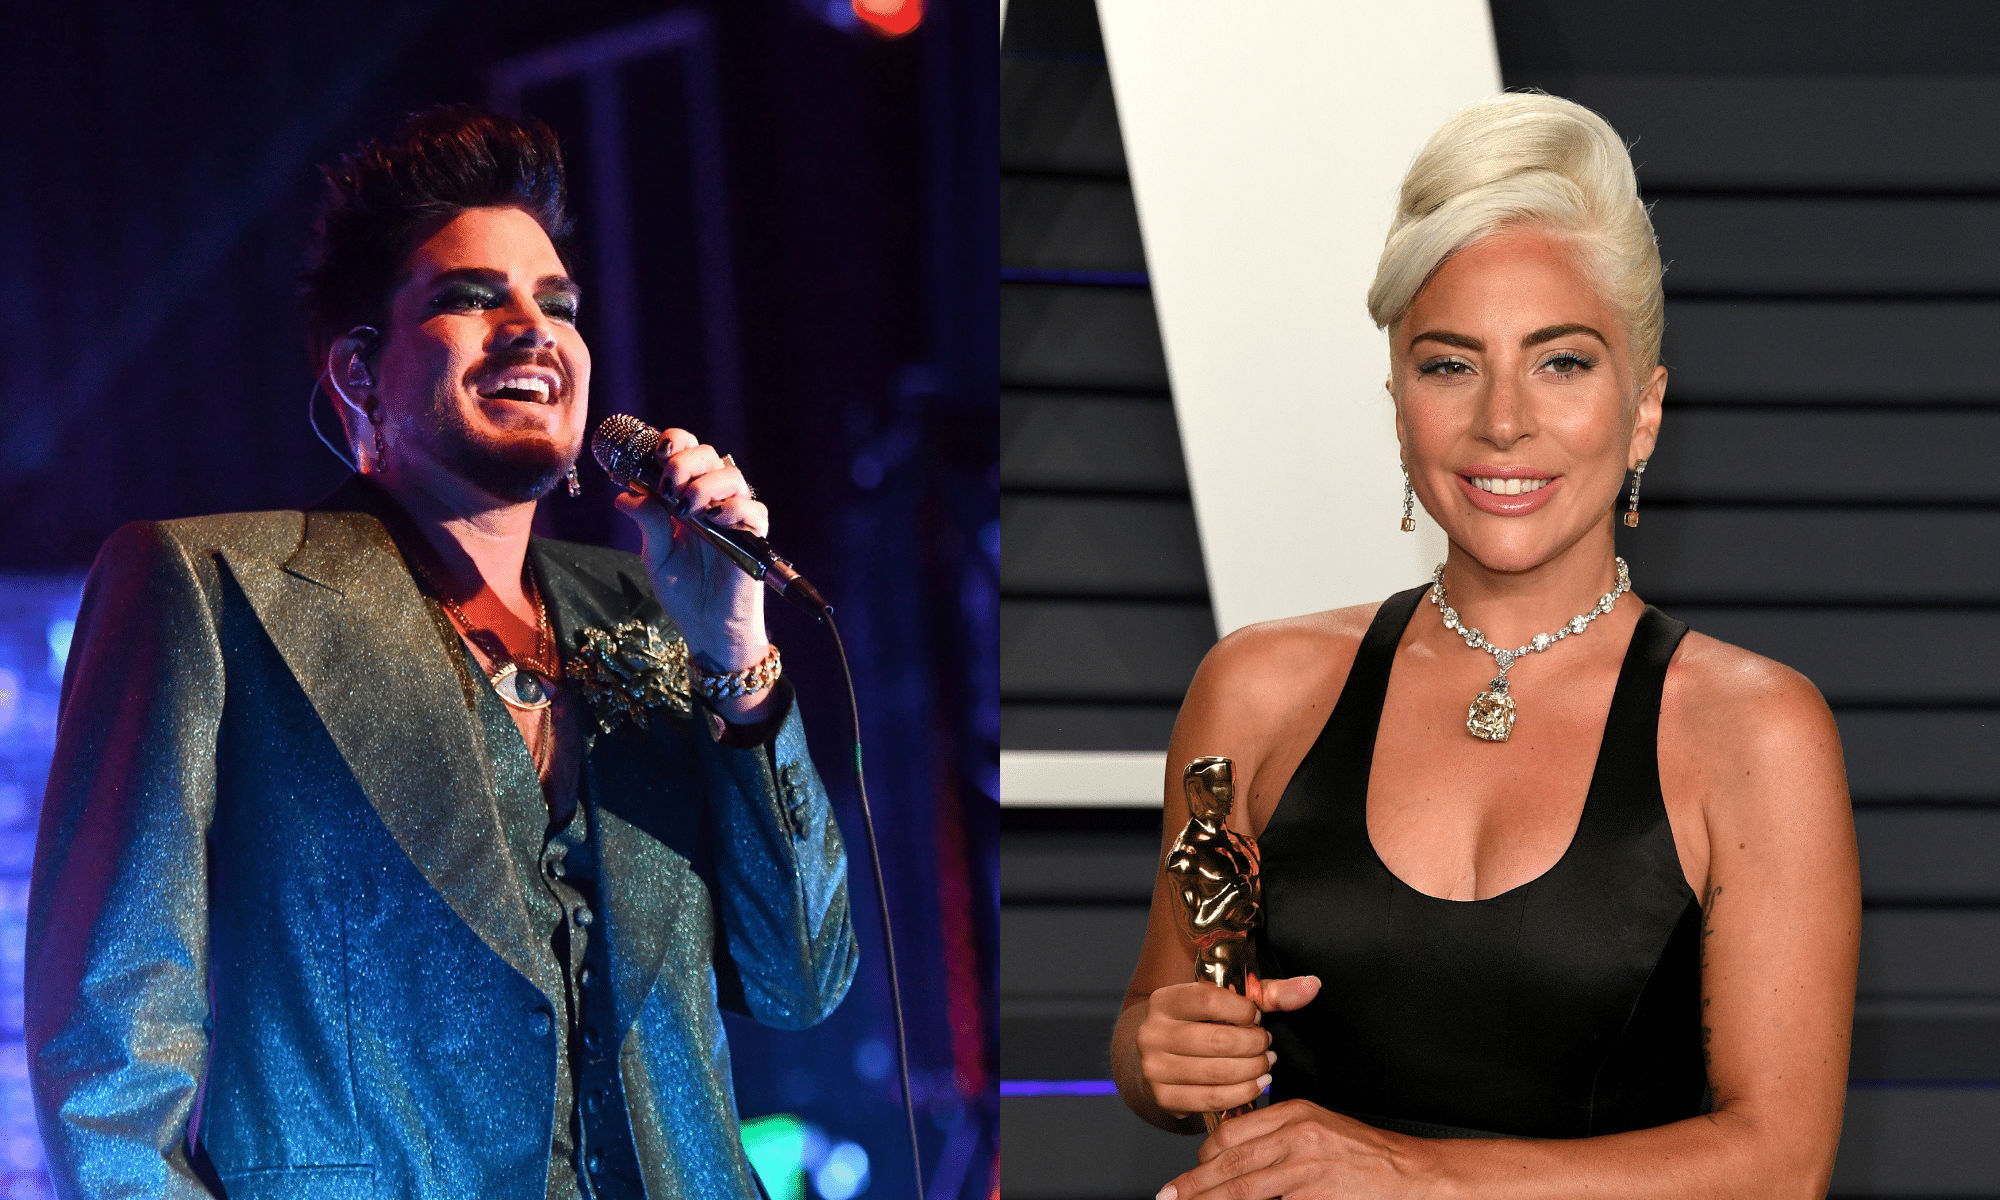 Adam Lambert and Lady Gaga have worked together before, performing together on Lambert's tour with Queen. (Getty)